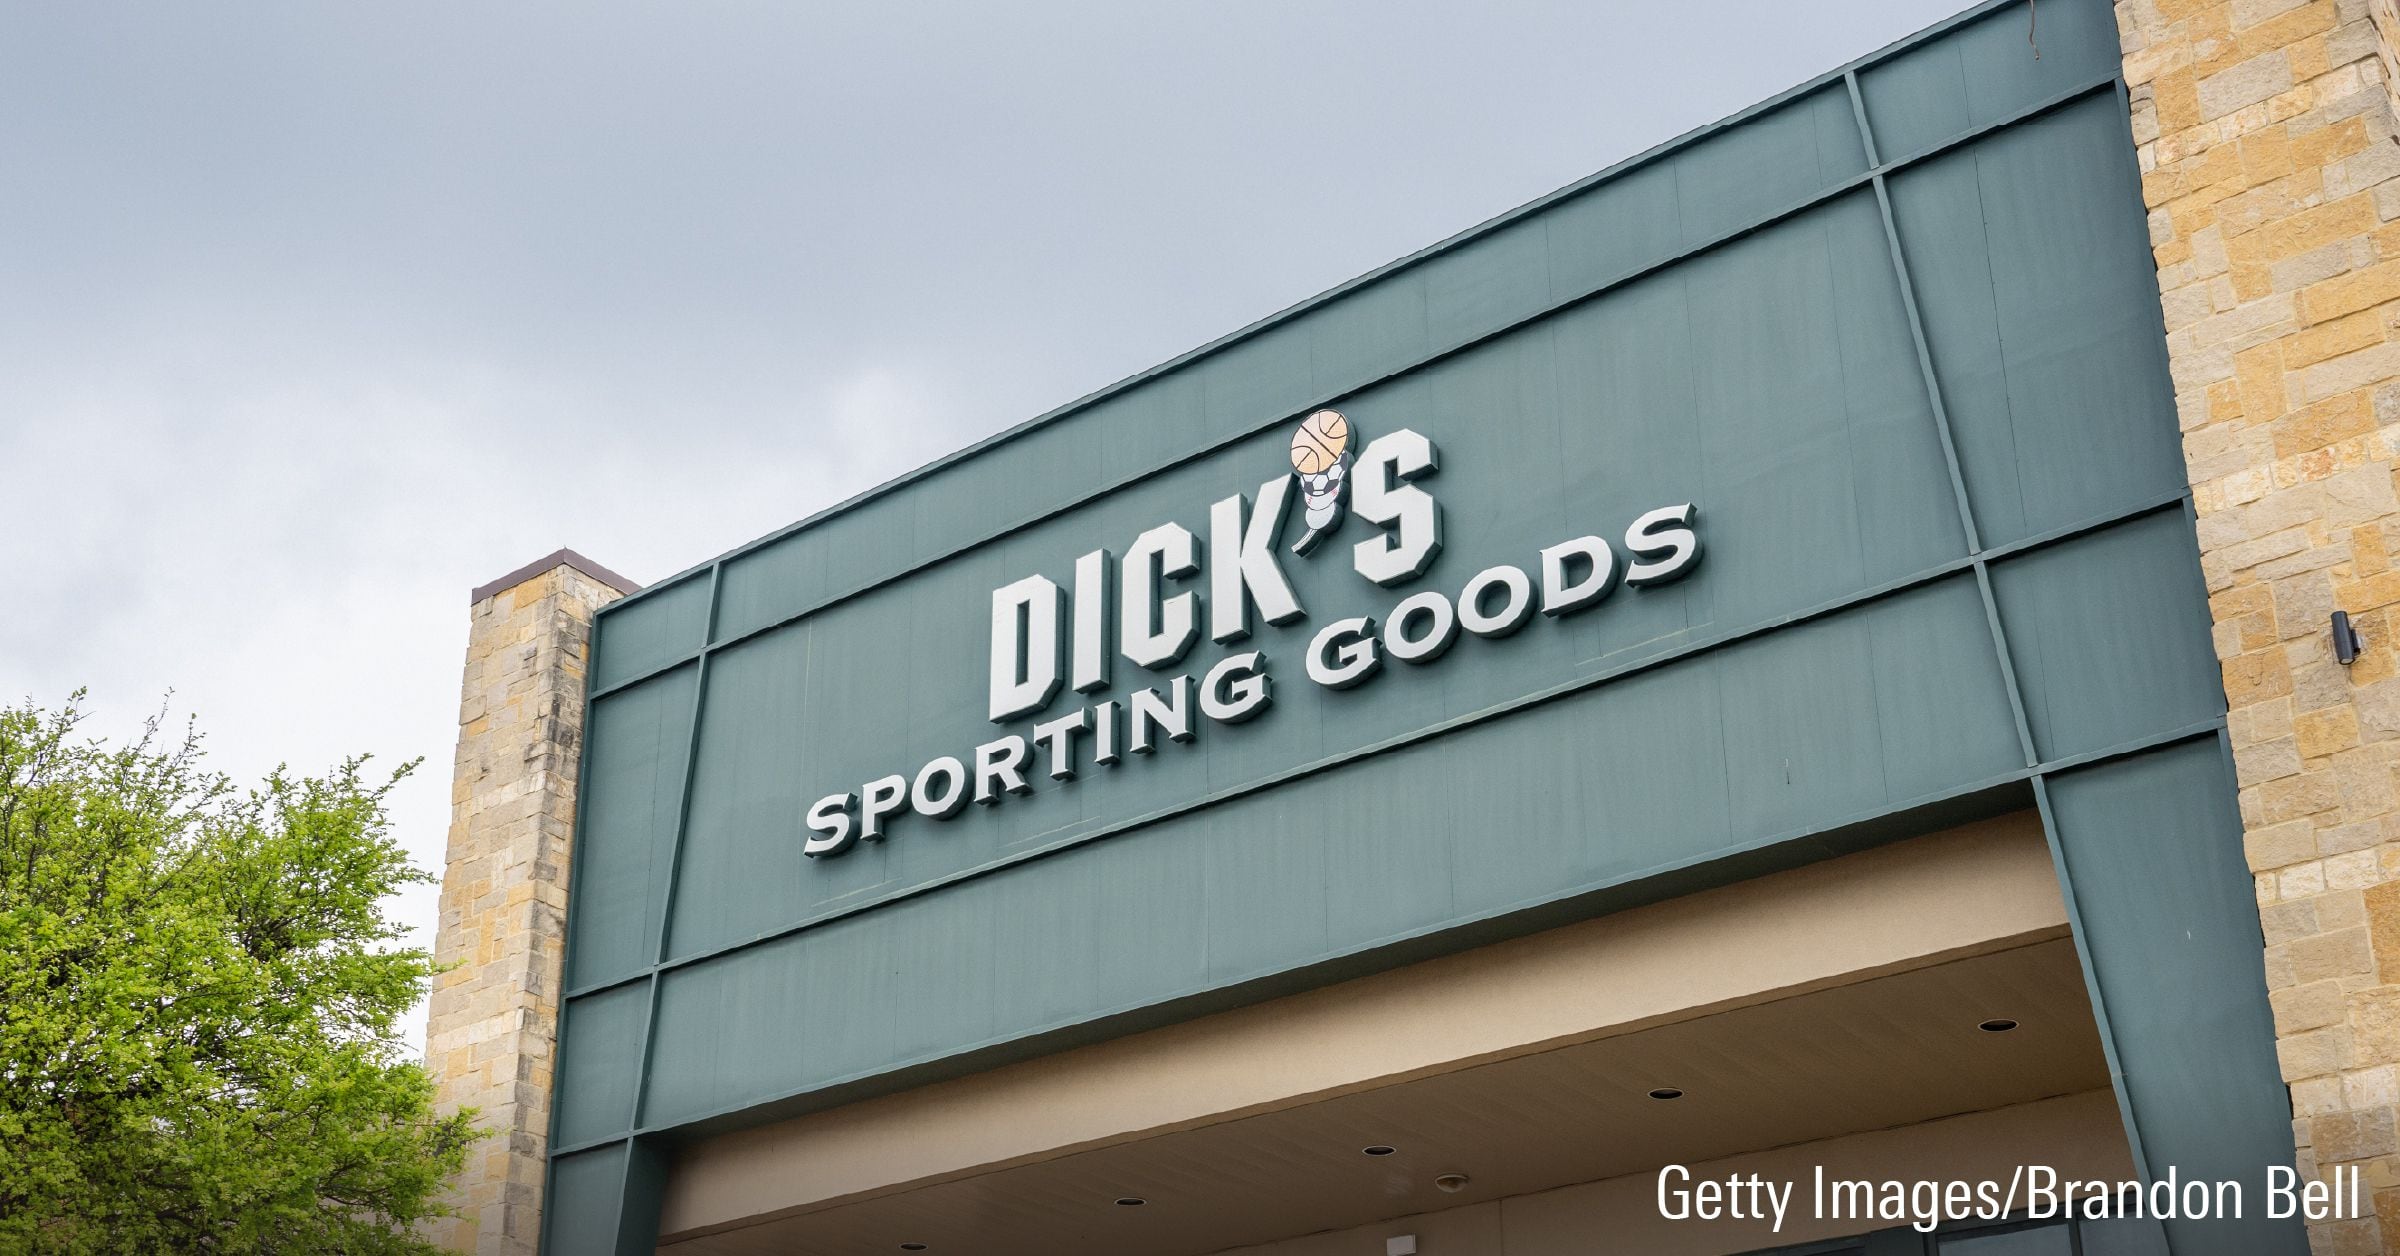 DICK'S Sporting Goods to kick-off two-day Grand Opening celebration